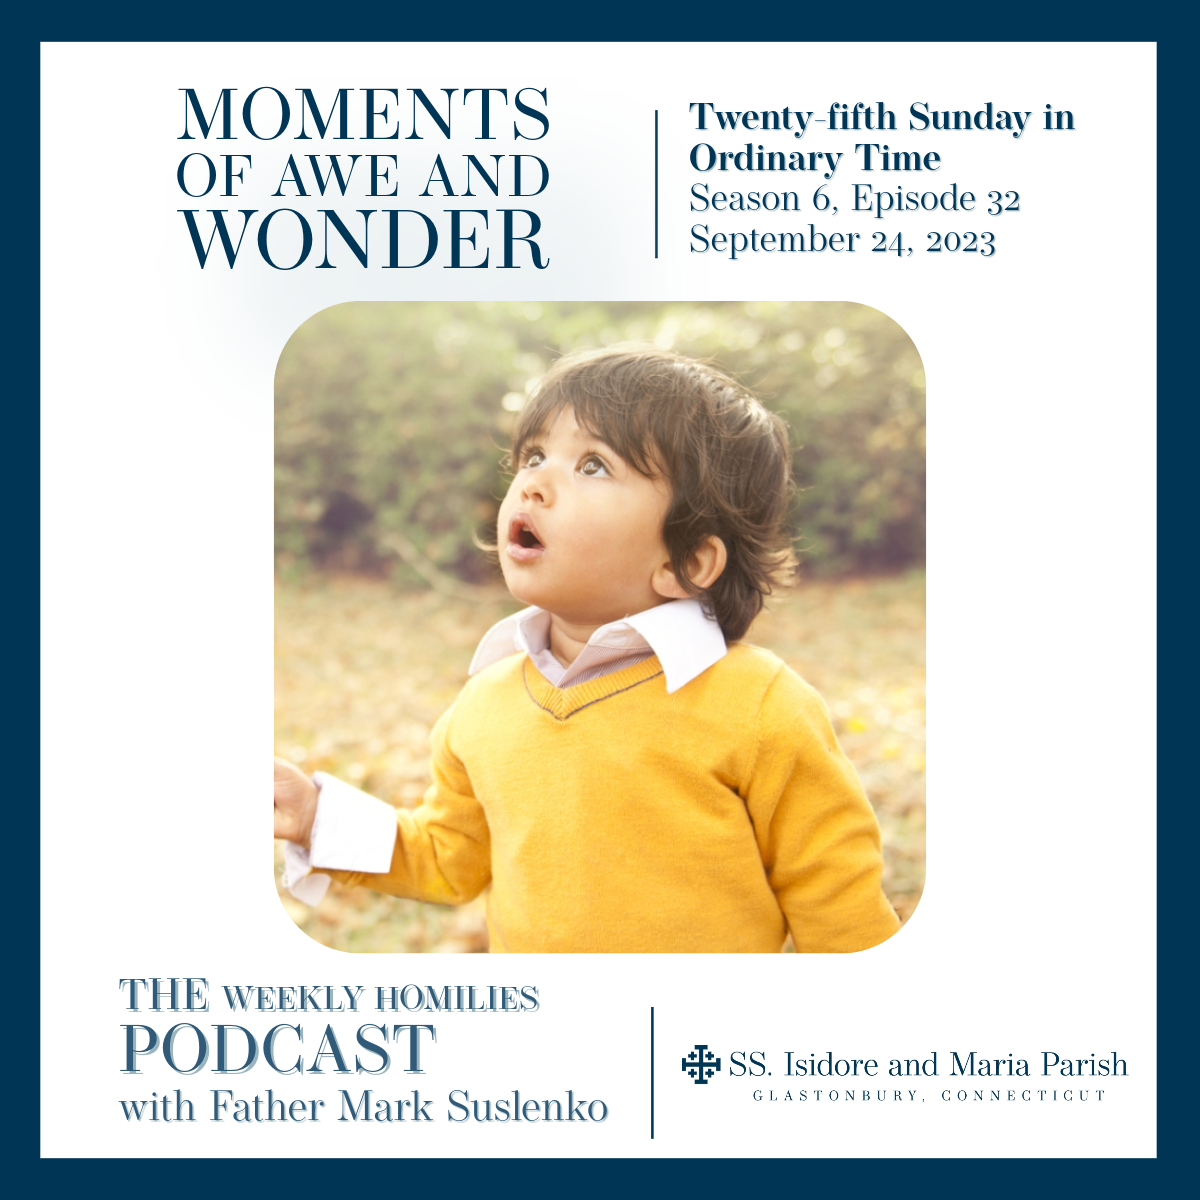 PODCAST: Moments of Awe and Wonder